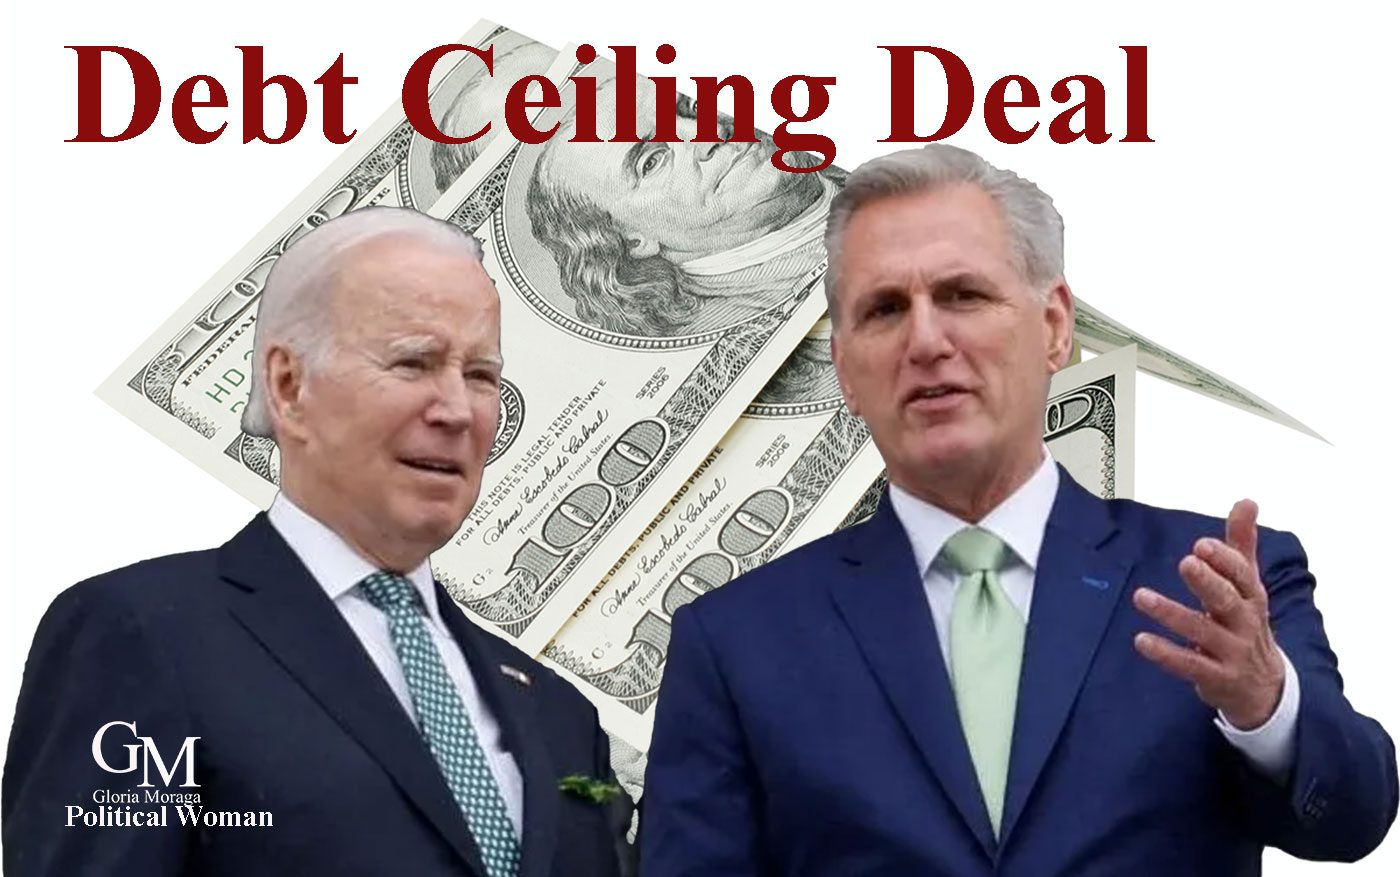 The Debt Ceiling Deal. Photo of Biden and Mccarthy